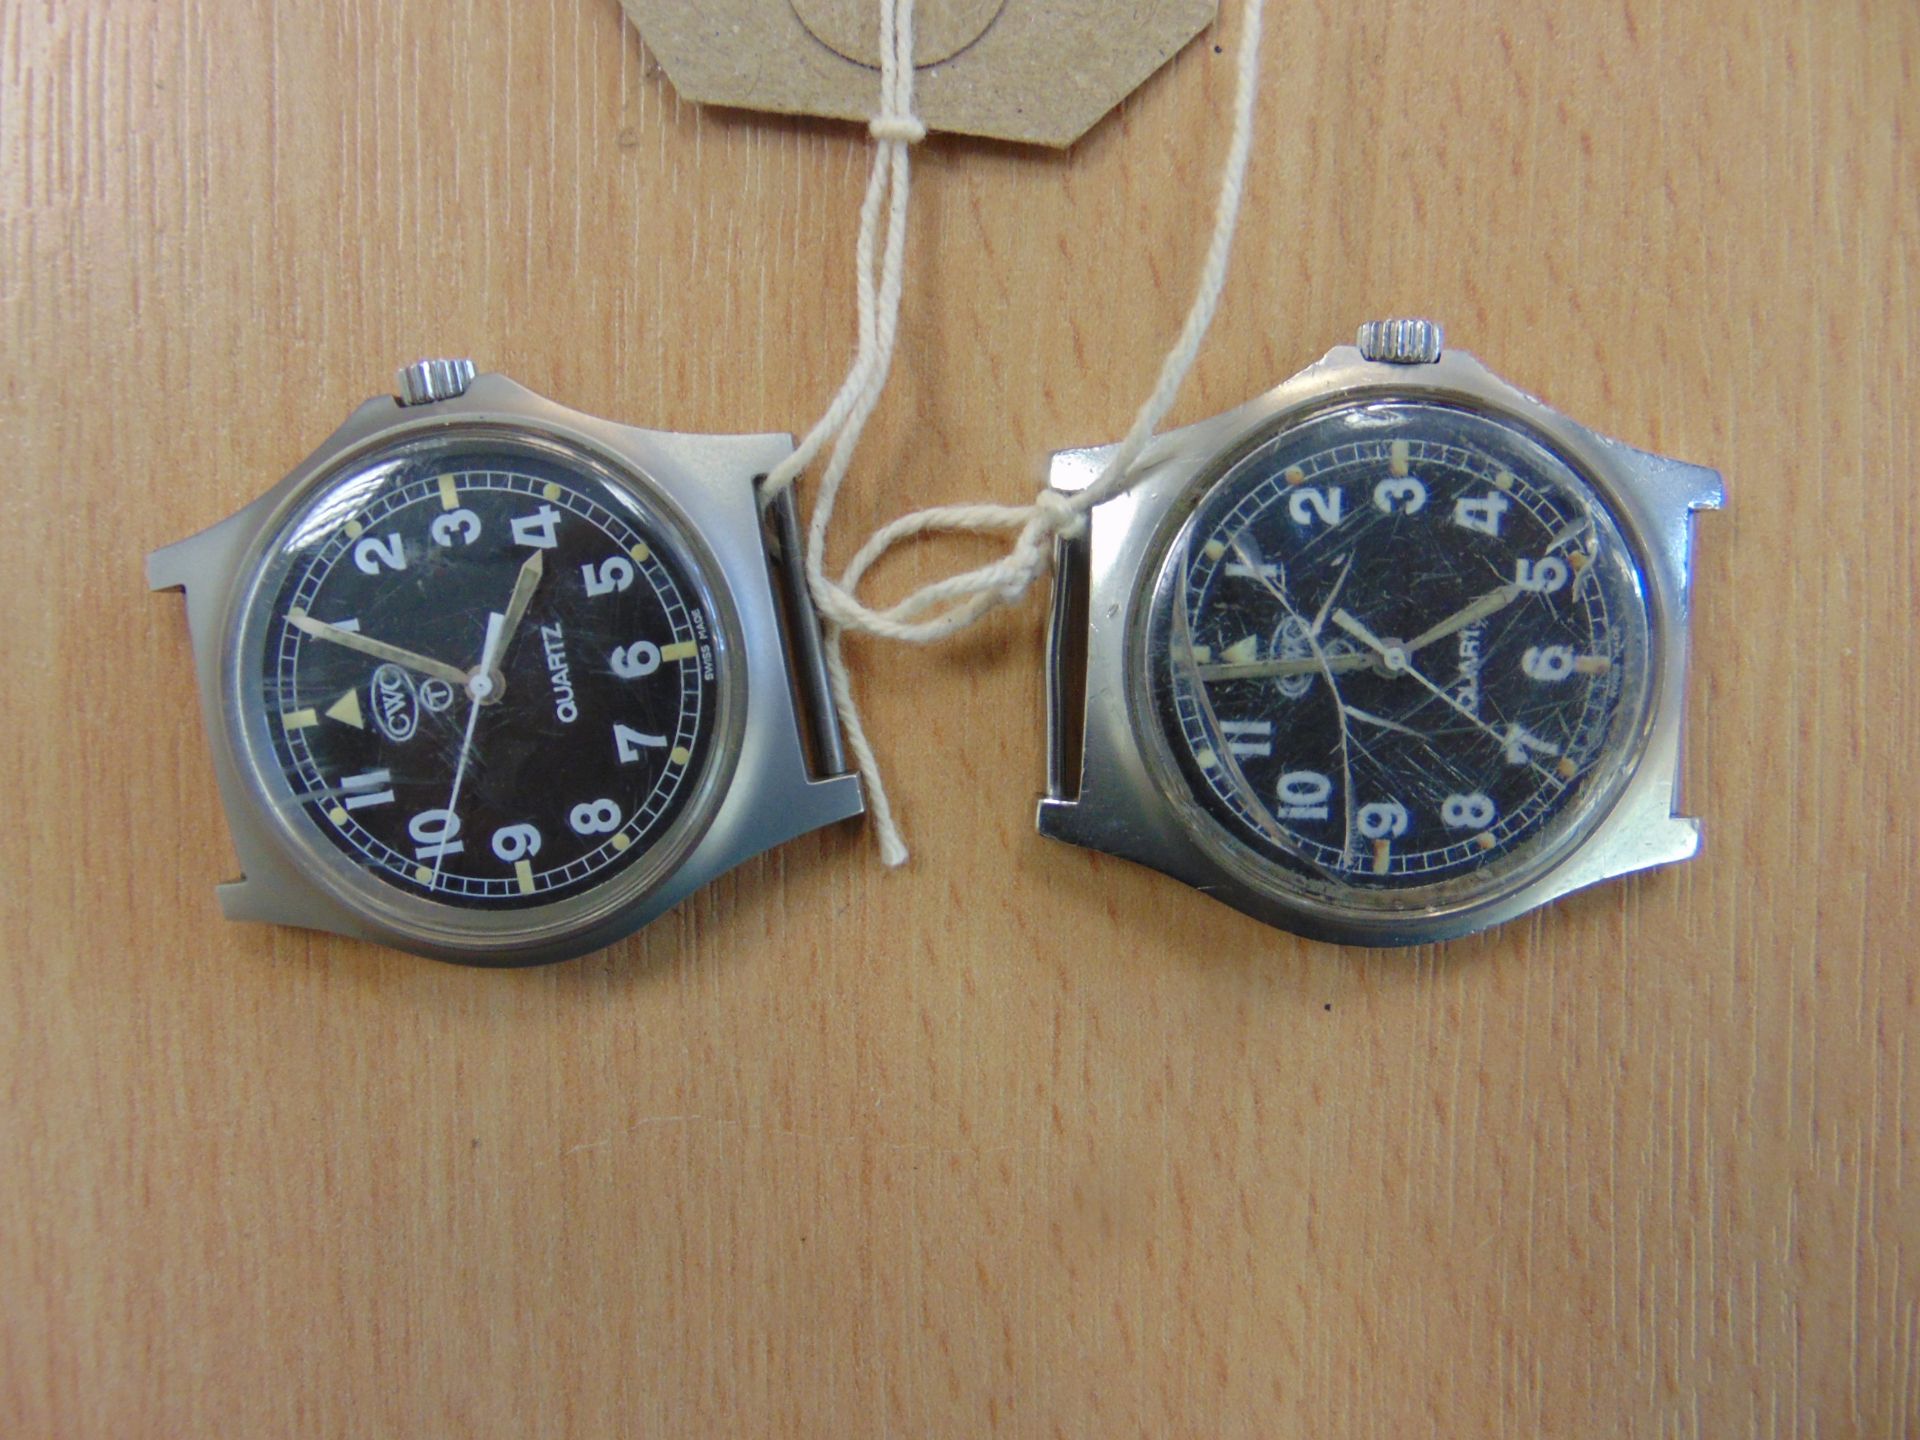 2X CWC 0552 ROYAL MARIINES ISSUE SERVICE WATCHES NATO MARKED DATE: 1989/90 - Image 2 of 8